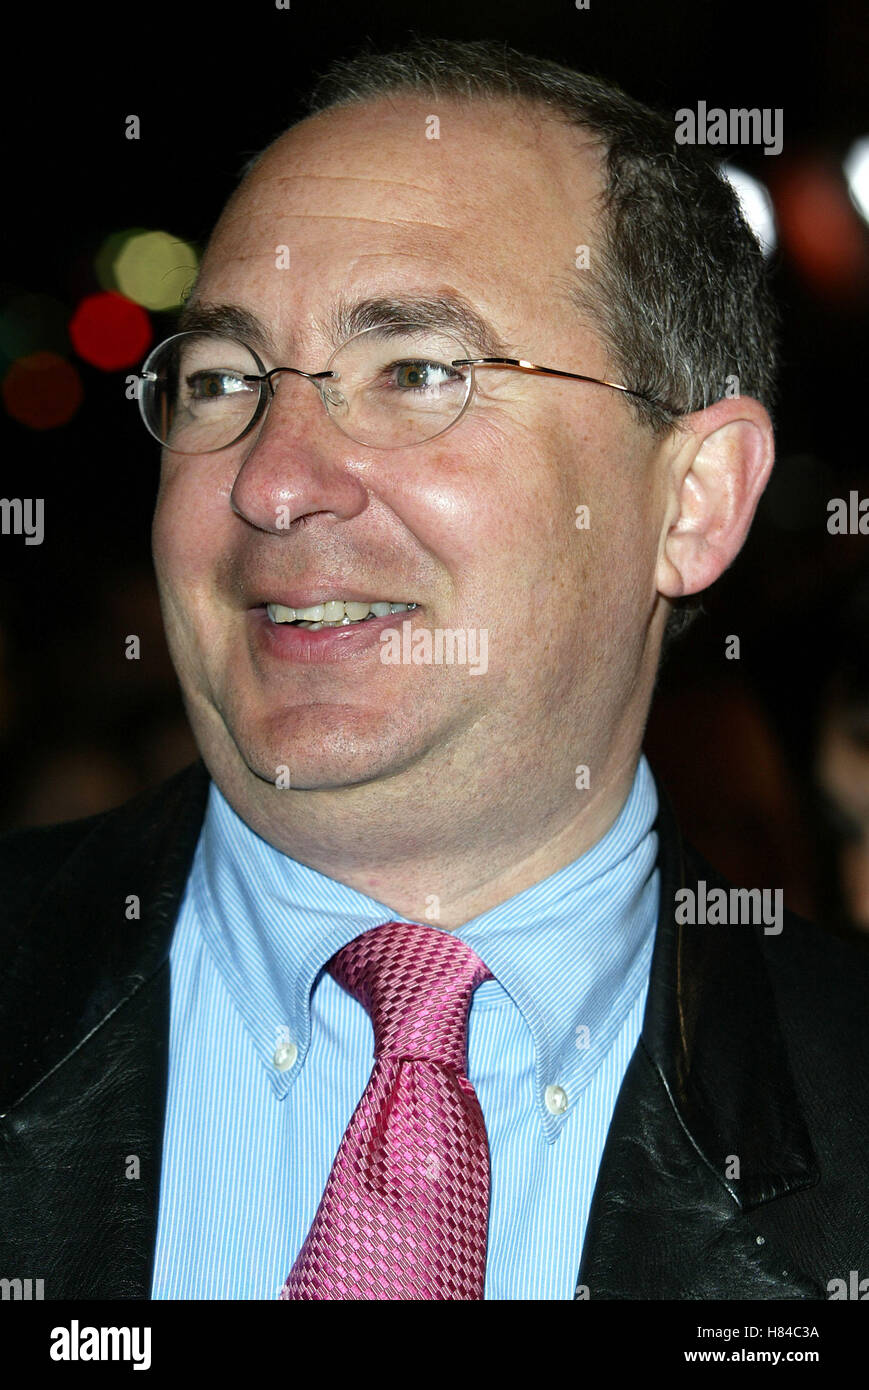 BARRY SONNENFELD BIG TROUBLE FILM PREMIERE HOLLYWOOD LOS ANGELES USA 02 April 2002 Stock Photo